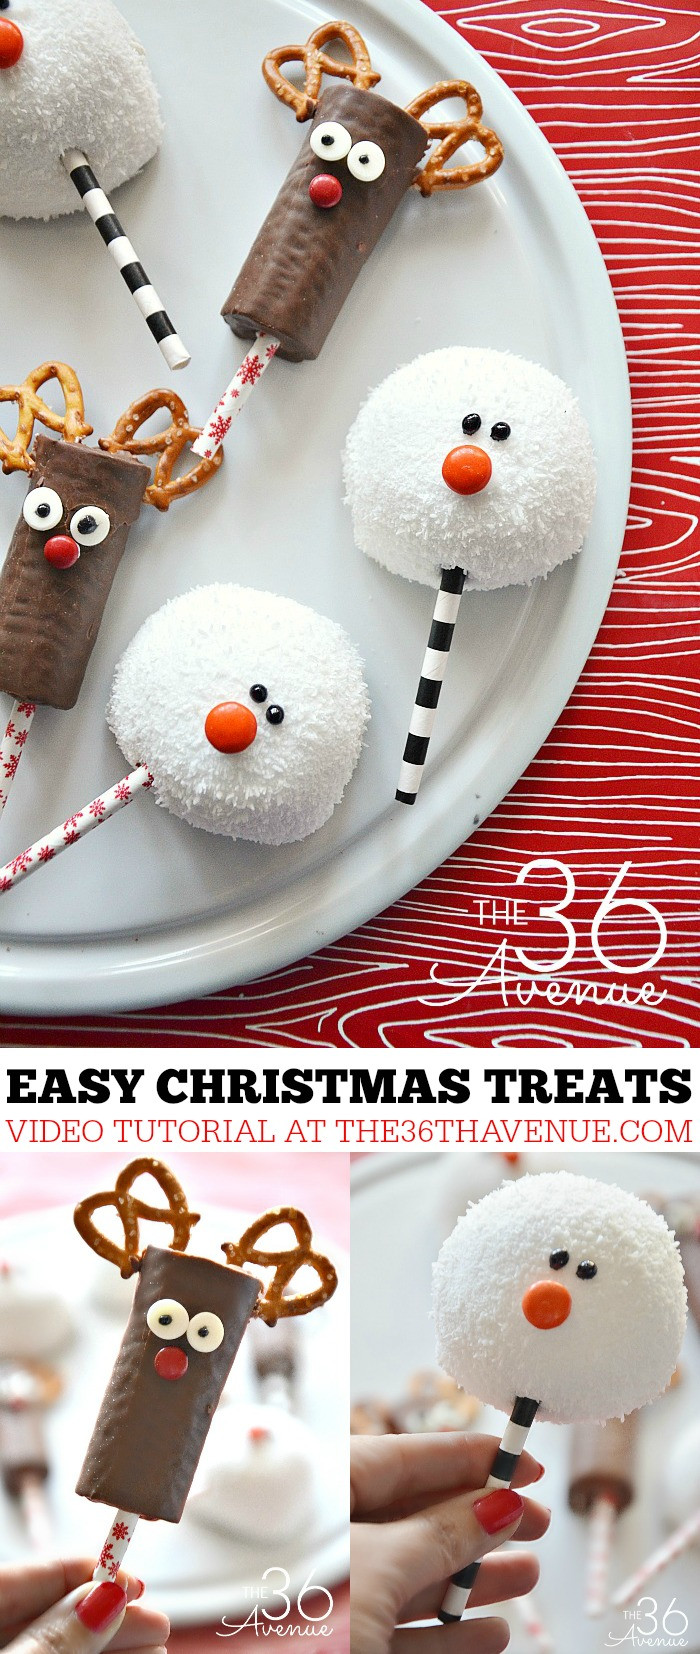 Easy To Make Christmas Desserts
 Christmas Treats Reindeer and Snowman The 36th AVENUE